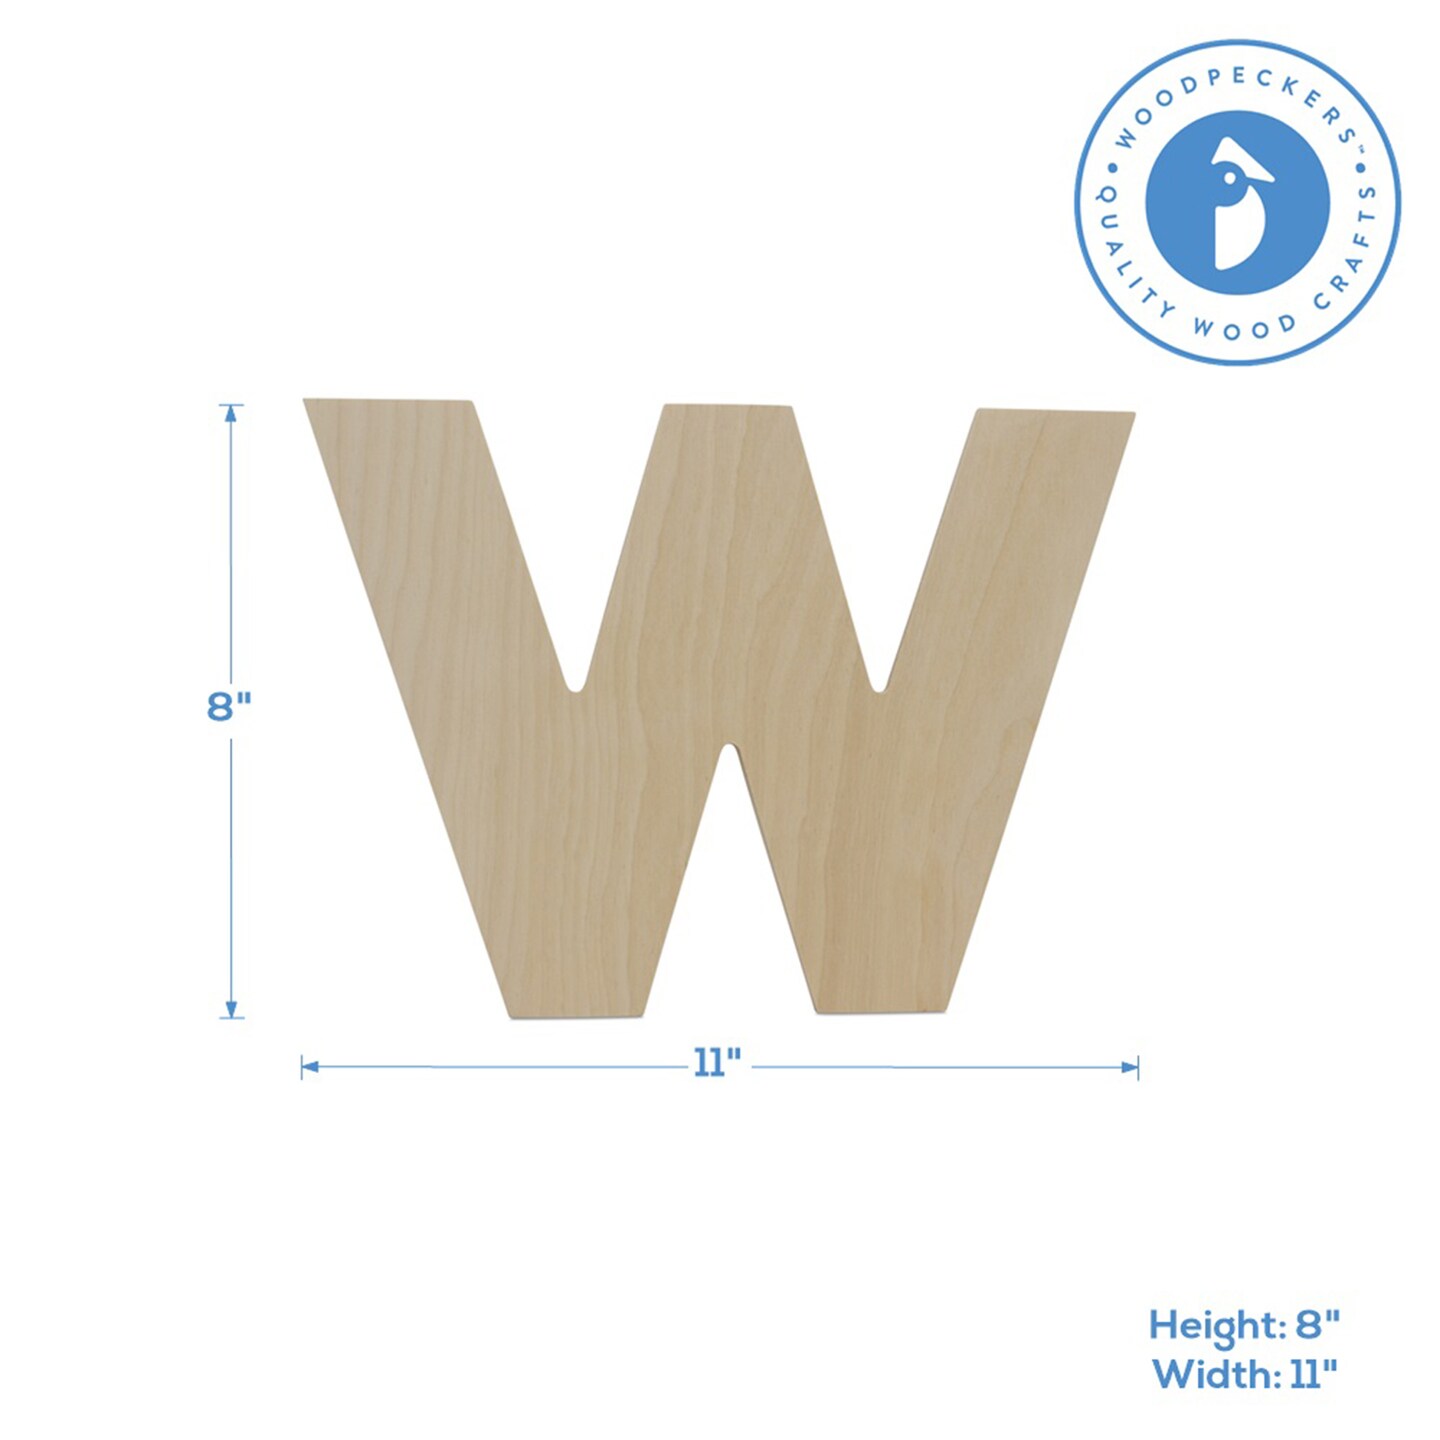 Wooden Letter W 12 inch or 8 inch, Unfinished Large Wood Letters for Crafts | Woodpeckers